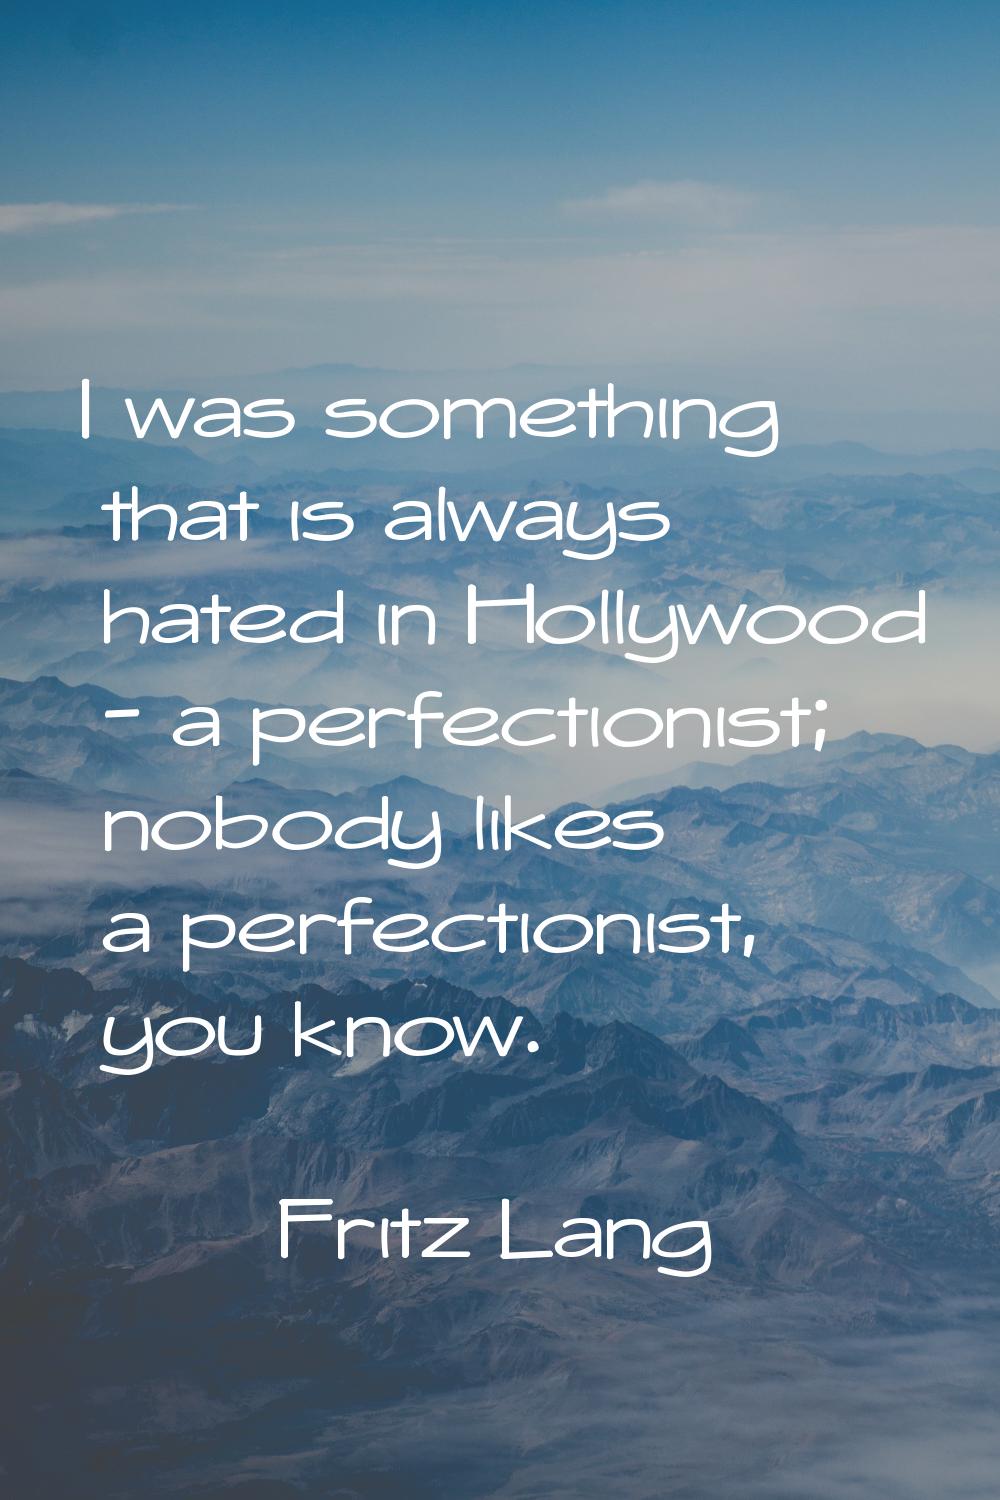 I was something that is always hated in Hollywood - a perfectionist; nobody likes a perfectionist, 